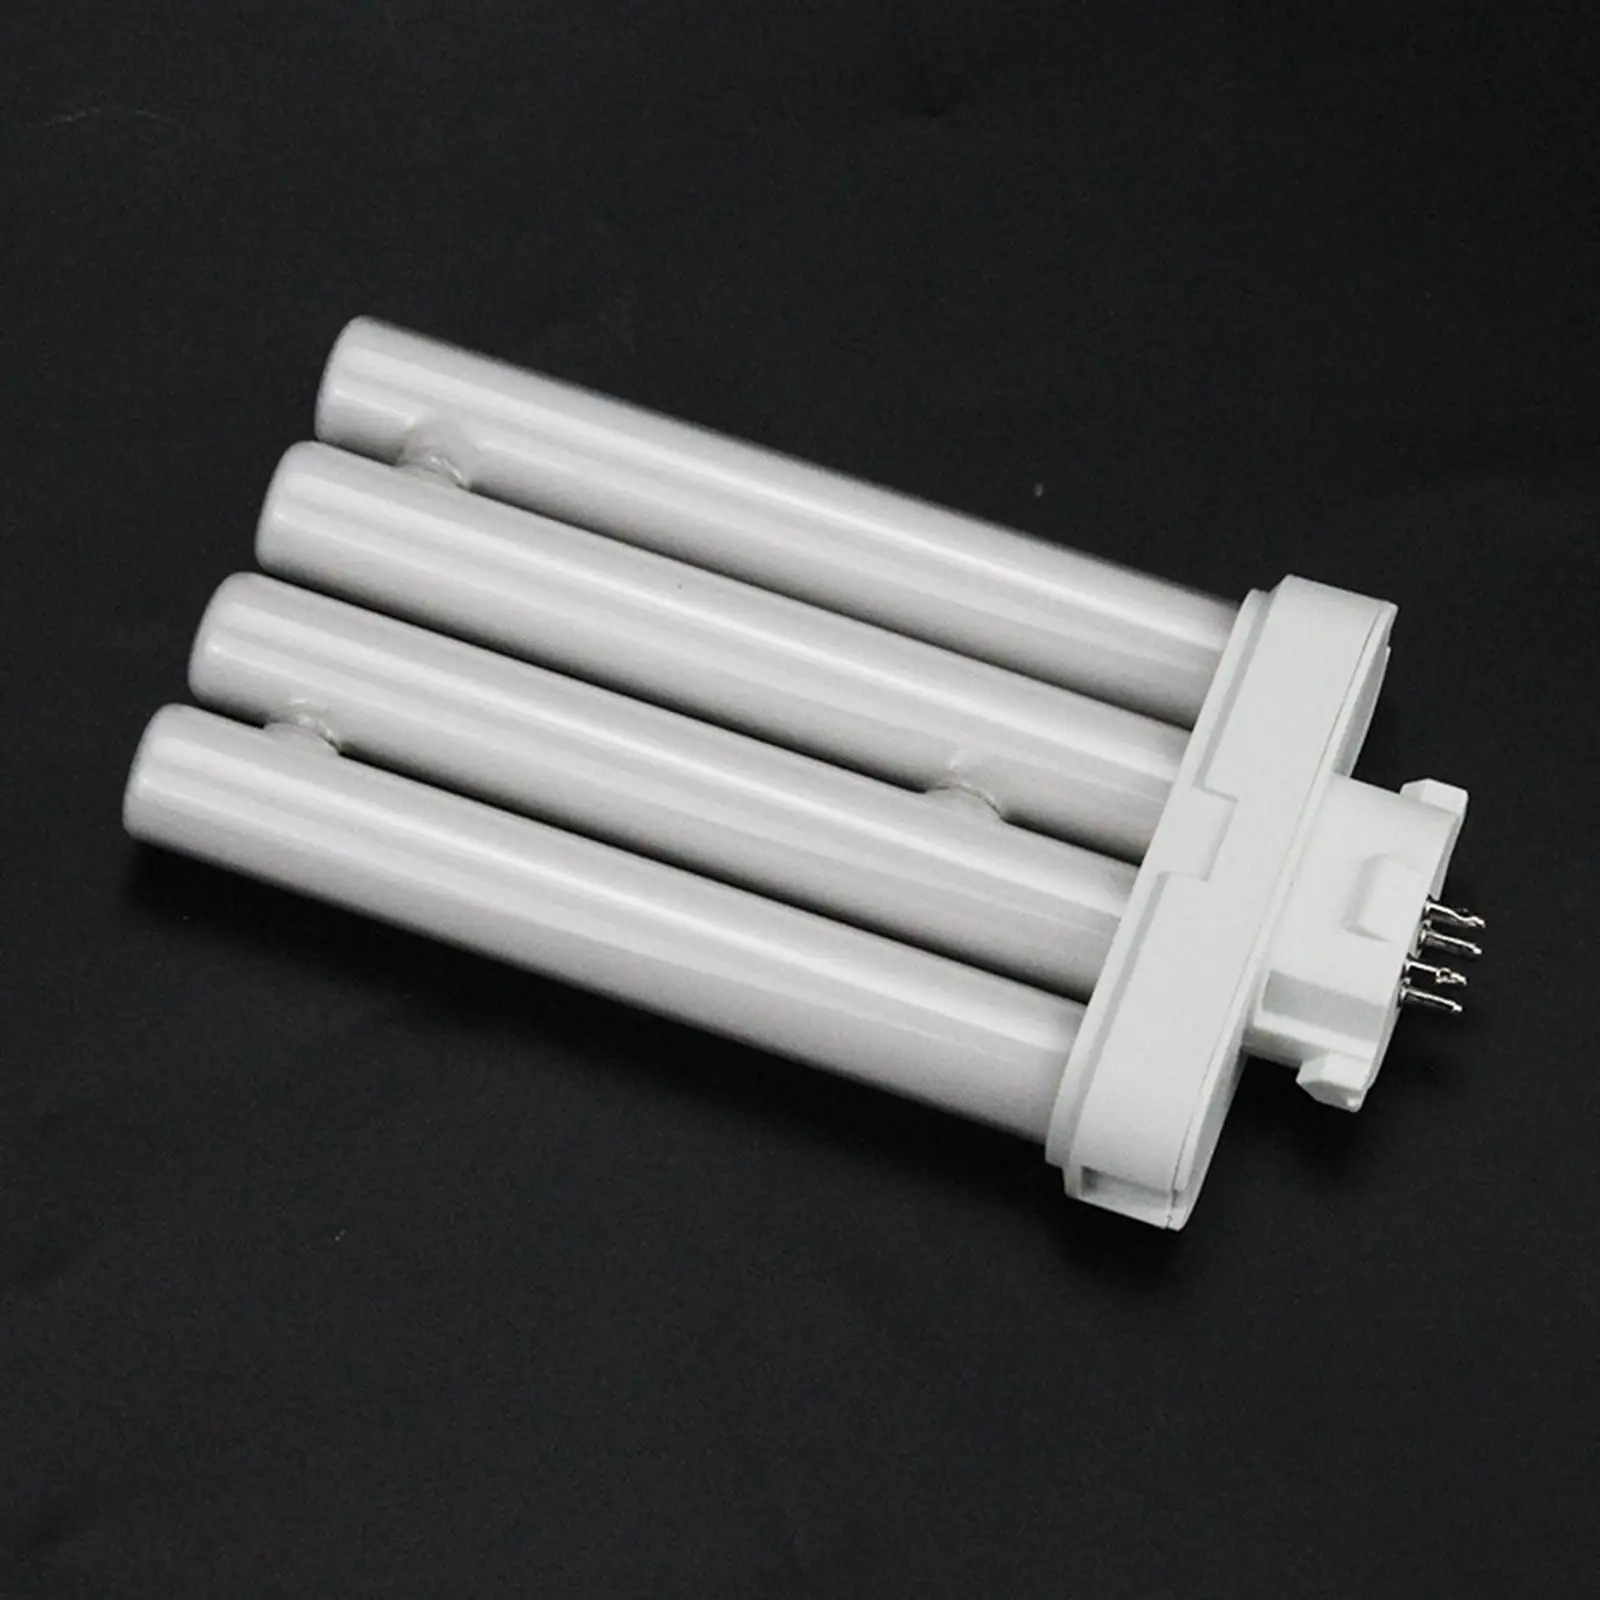 Quad Tube Lamp Unique Fluorescent Bulb Reading Desk Lamp Easy to Install Indoor Tube 4 Pin Compact Fluorescent Plug in Lamp